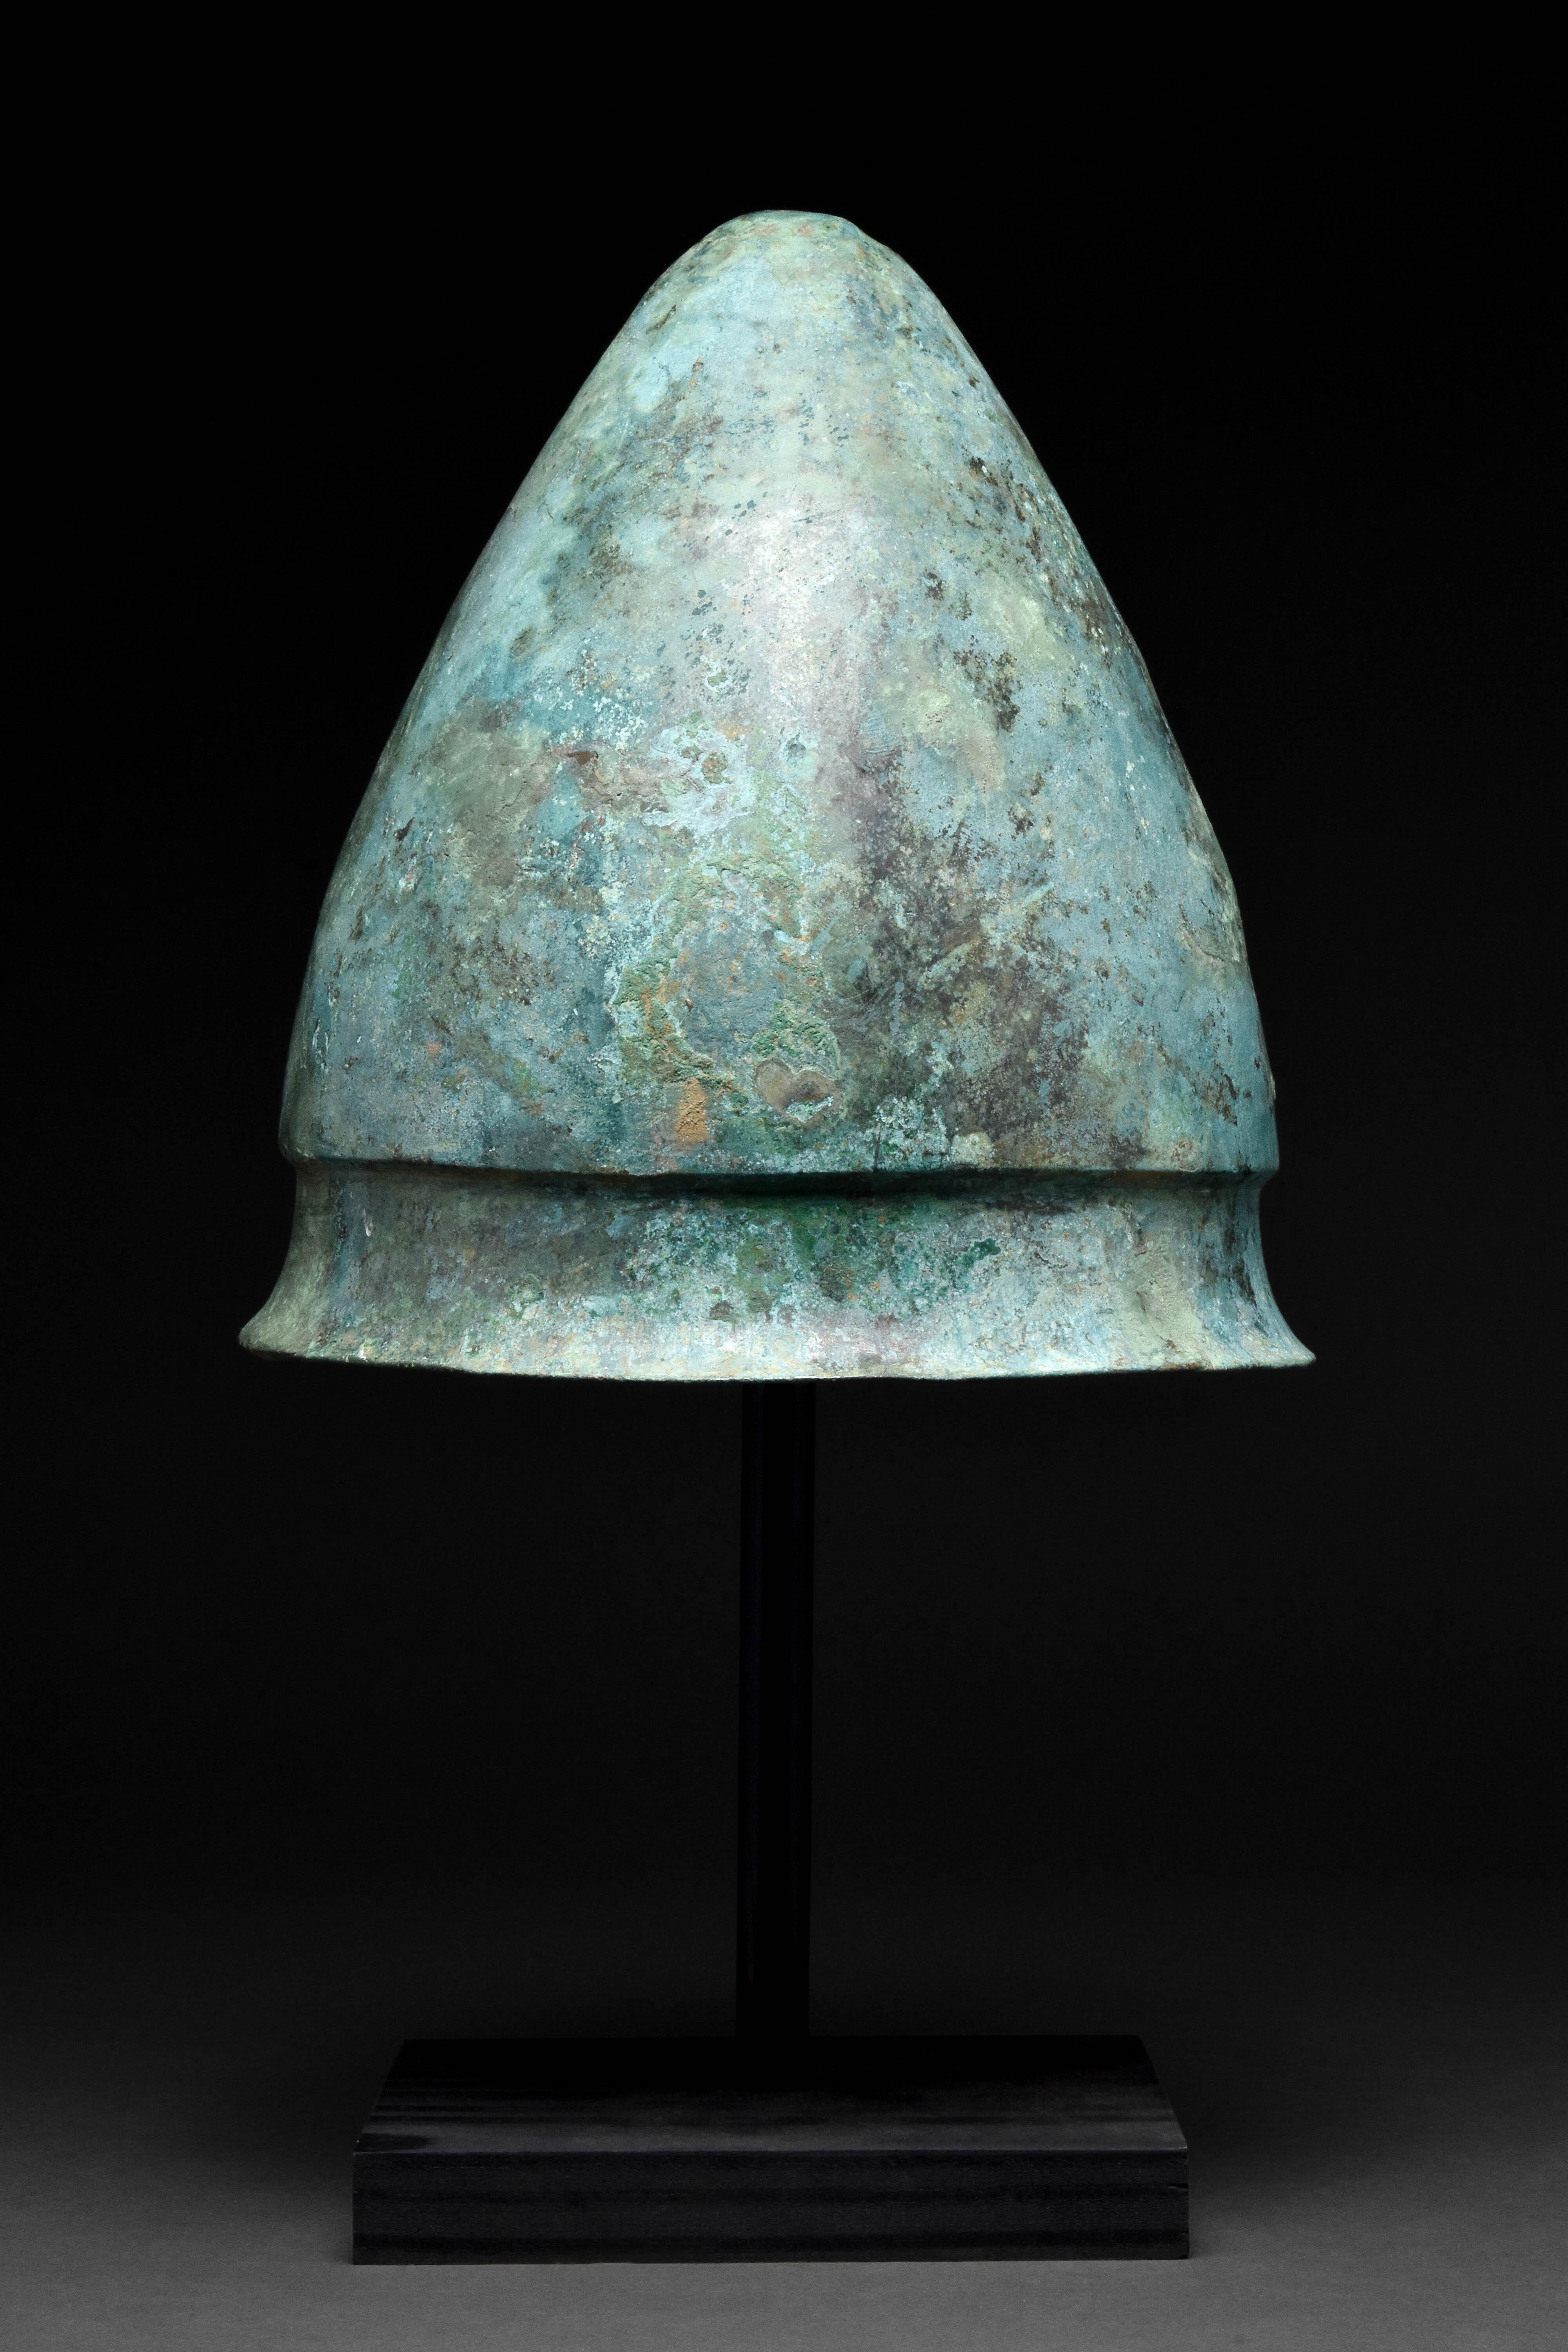 Circa 400-350 BC

A bronze Etrusco-Italic helmet, a variant of the Negau type, a regional Italian style with a characteristically conical shape. The tall, capped form resolves in a concave neck with a pronounced brim. It once would have been